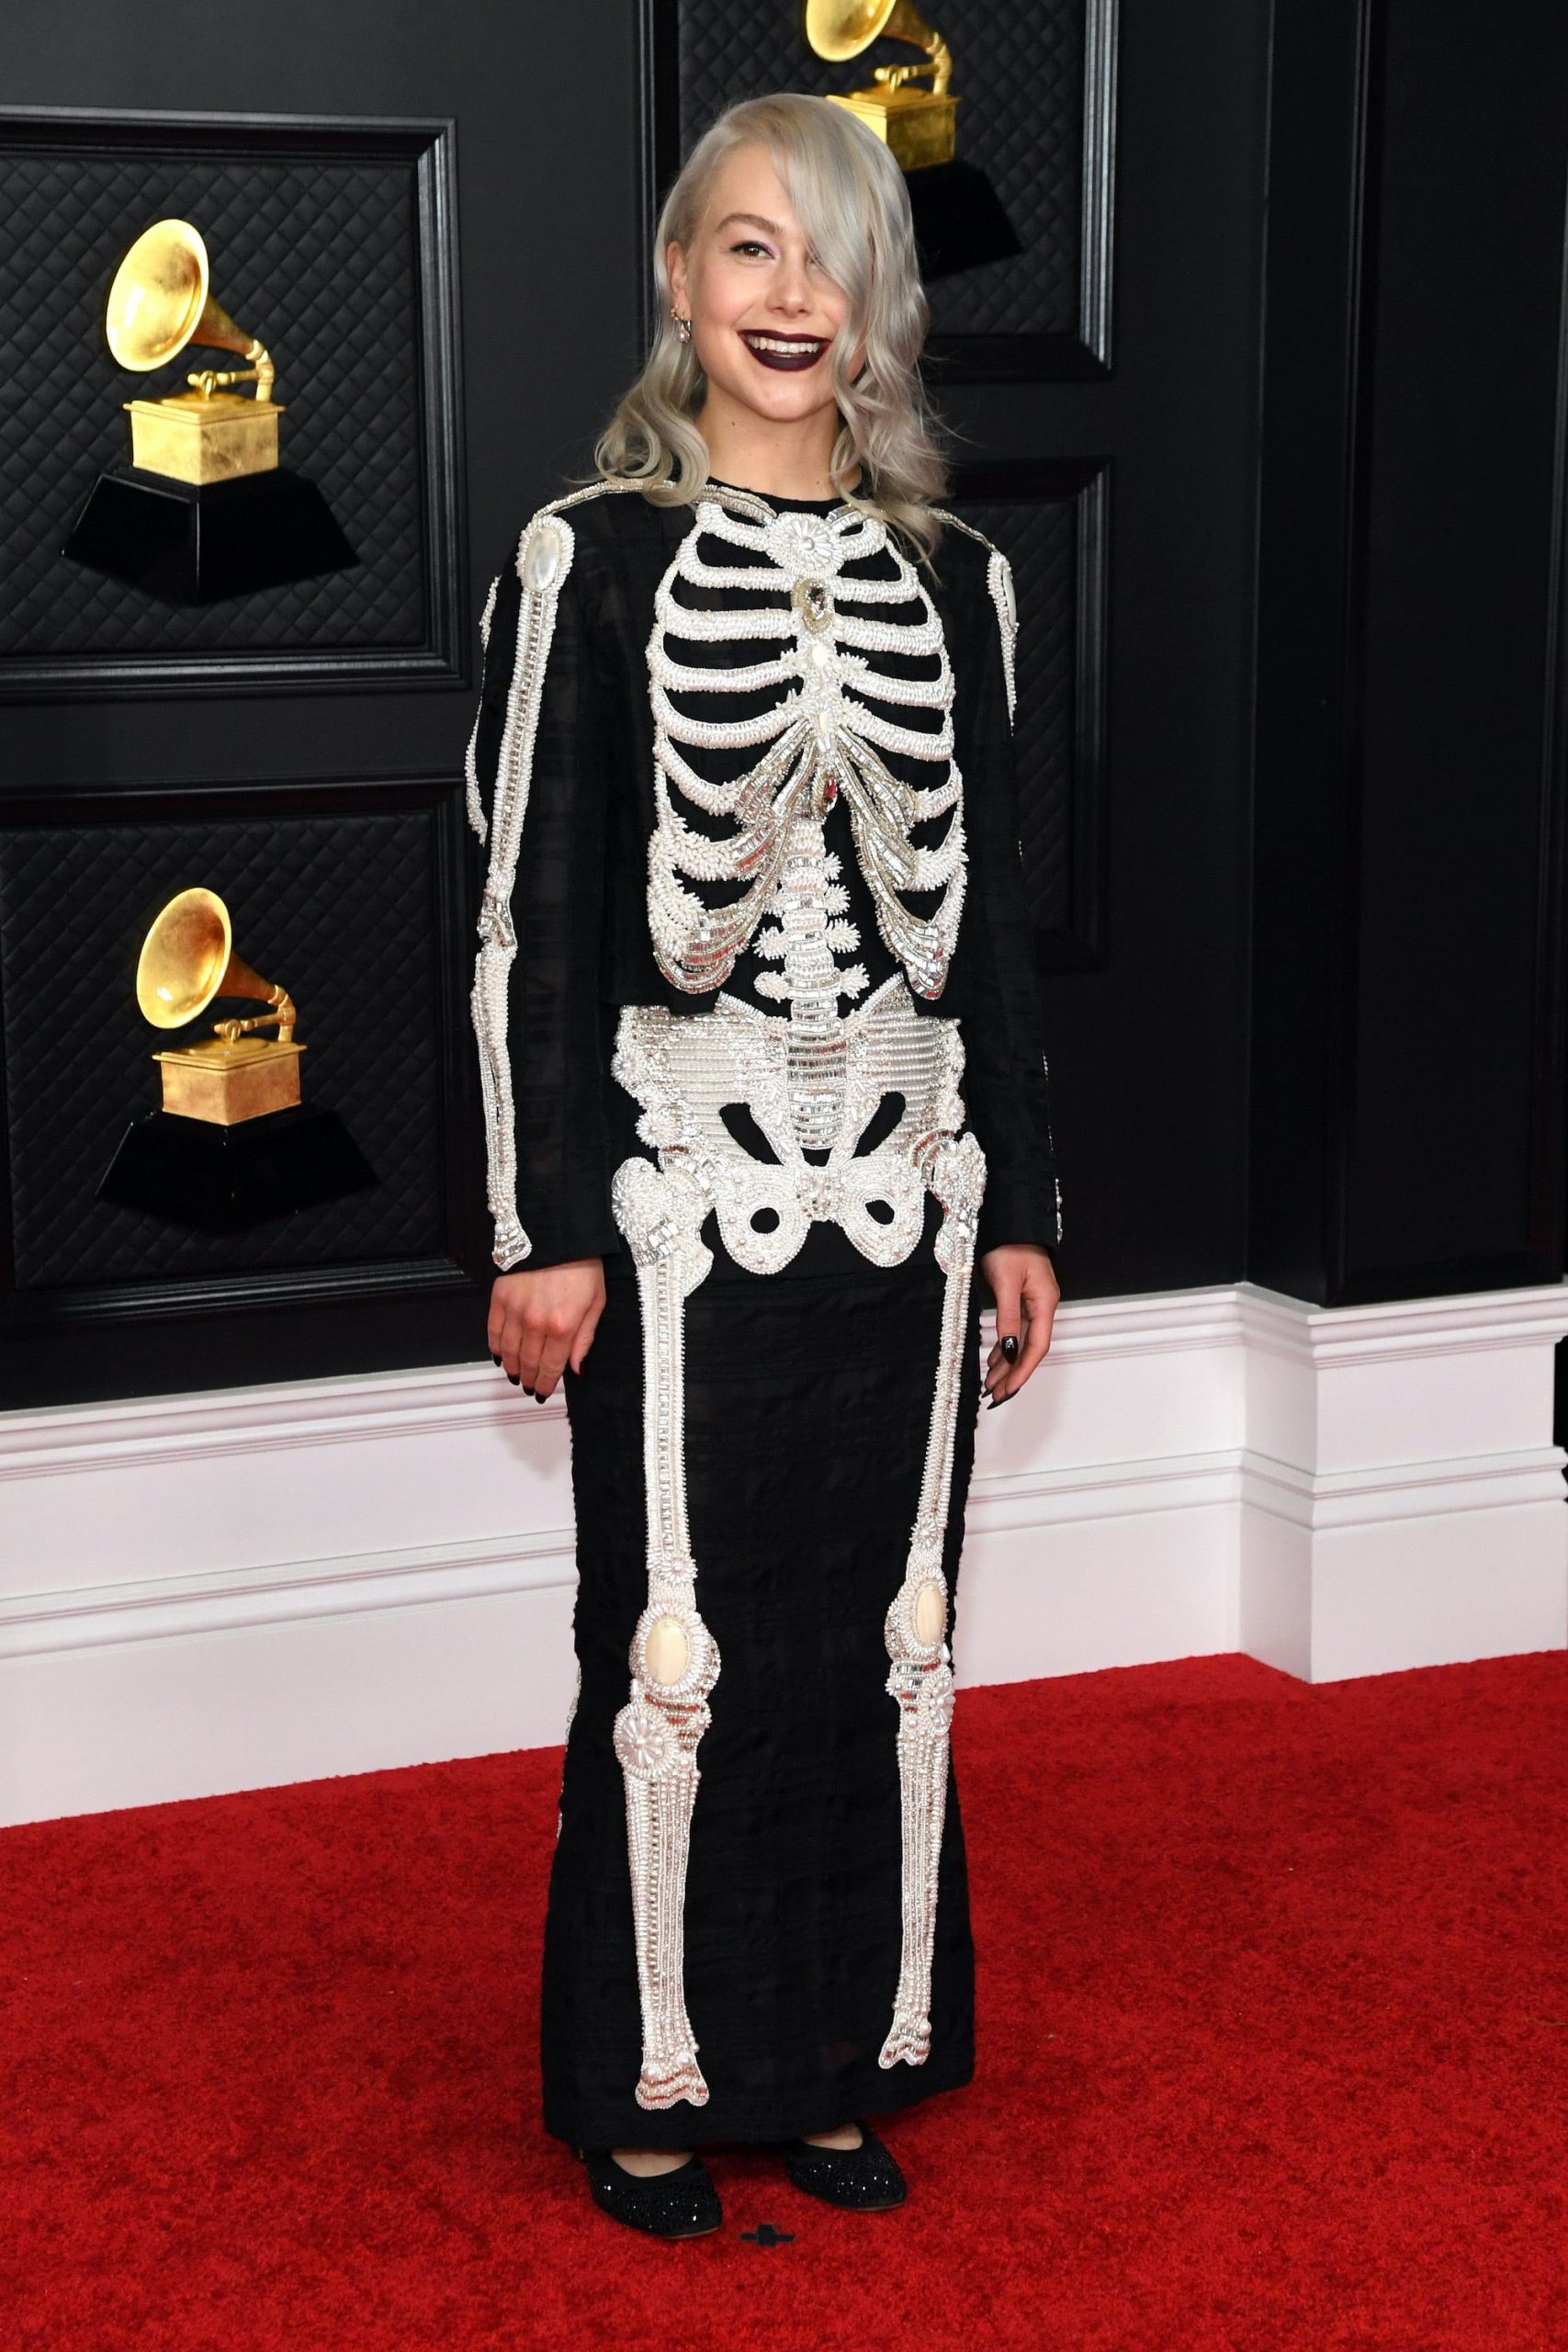 Phoebe Bridgers wore a sparkly version of her signature skeleton